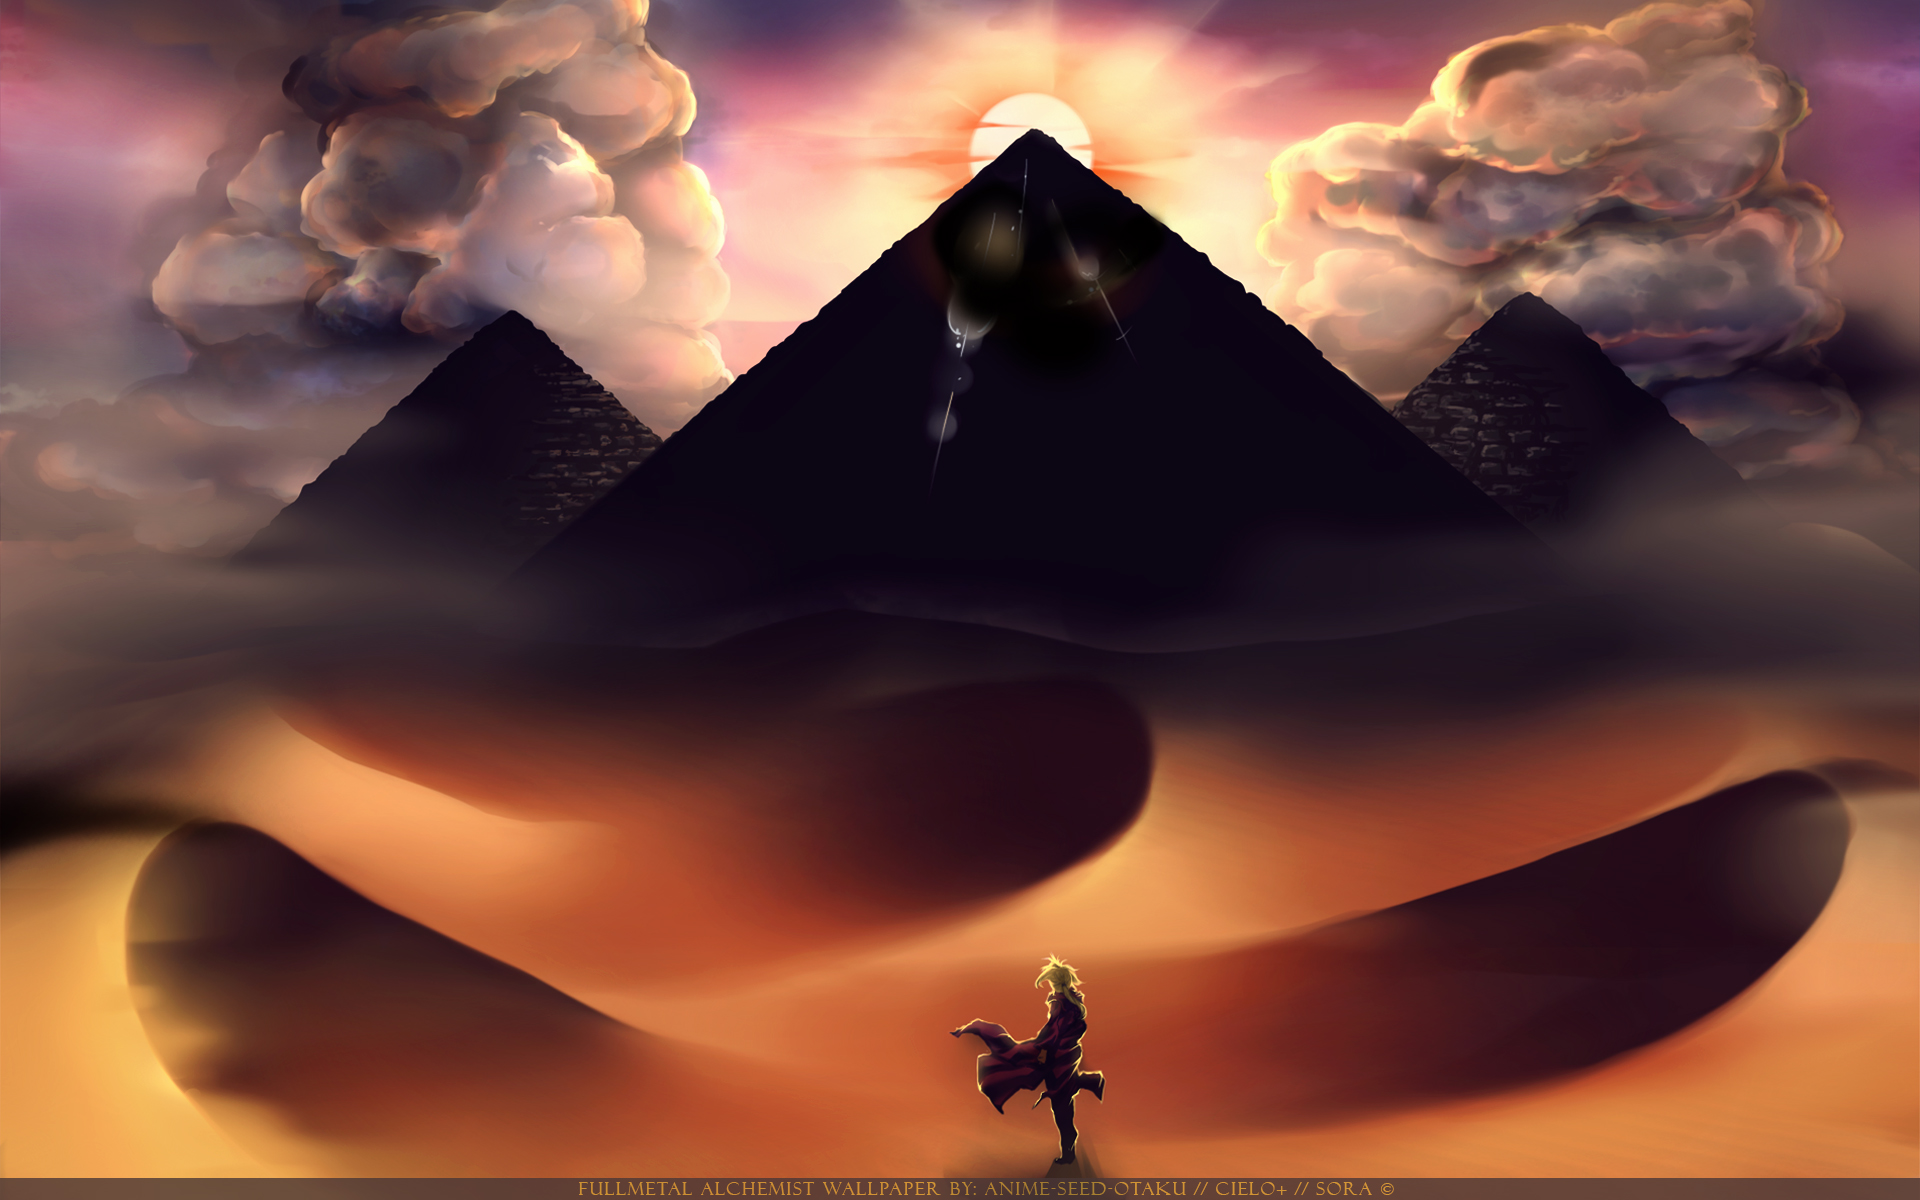 Download wallpaper from anime FullMetal Alchemist with tags: Computer, Edward Elric, Desert, Pyramid